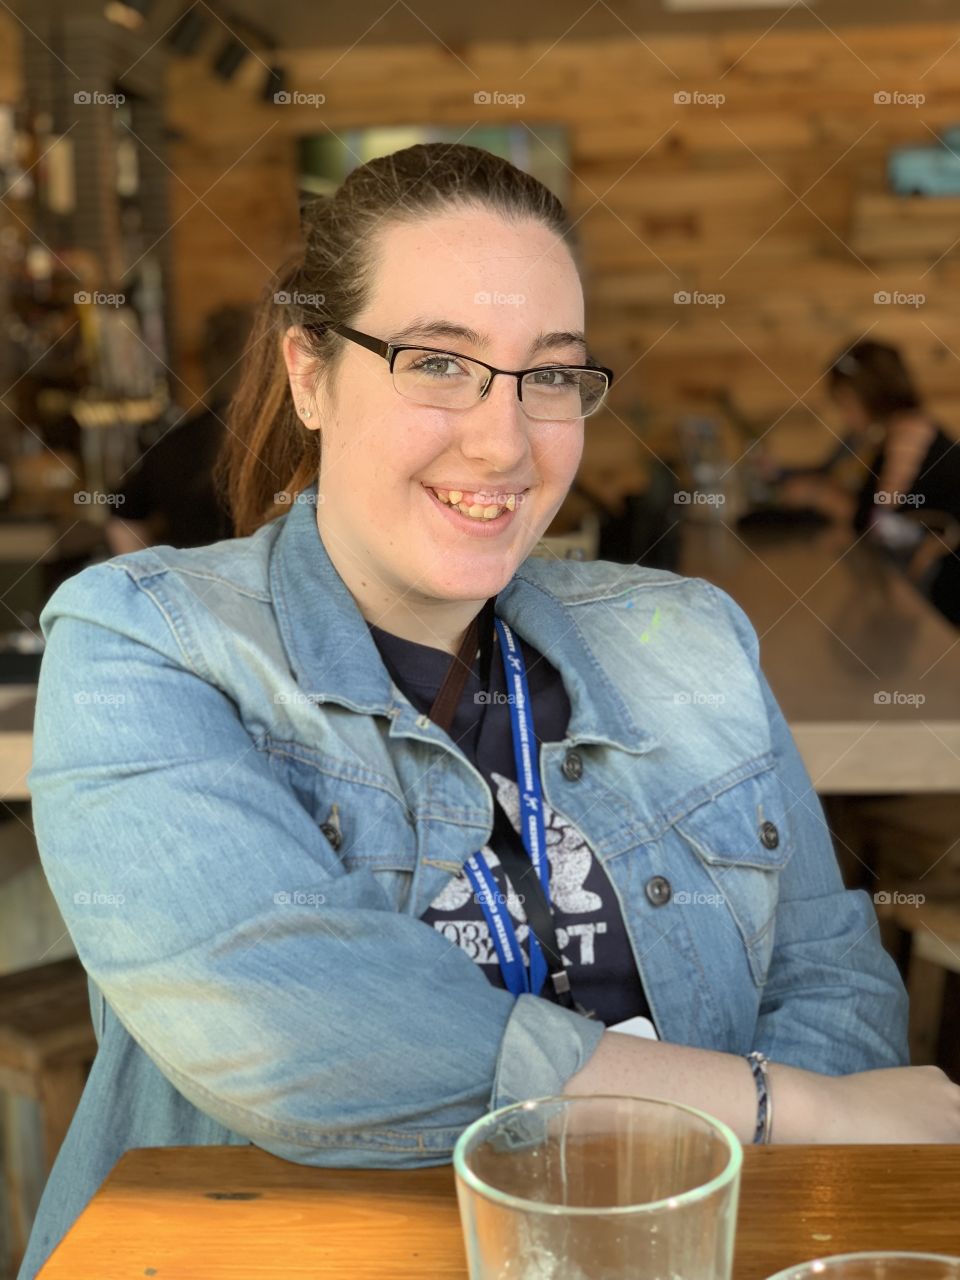 Smiling young adult in a denim jacket at a local restaurant in Omaha Nebraska